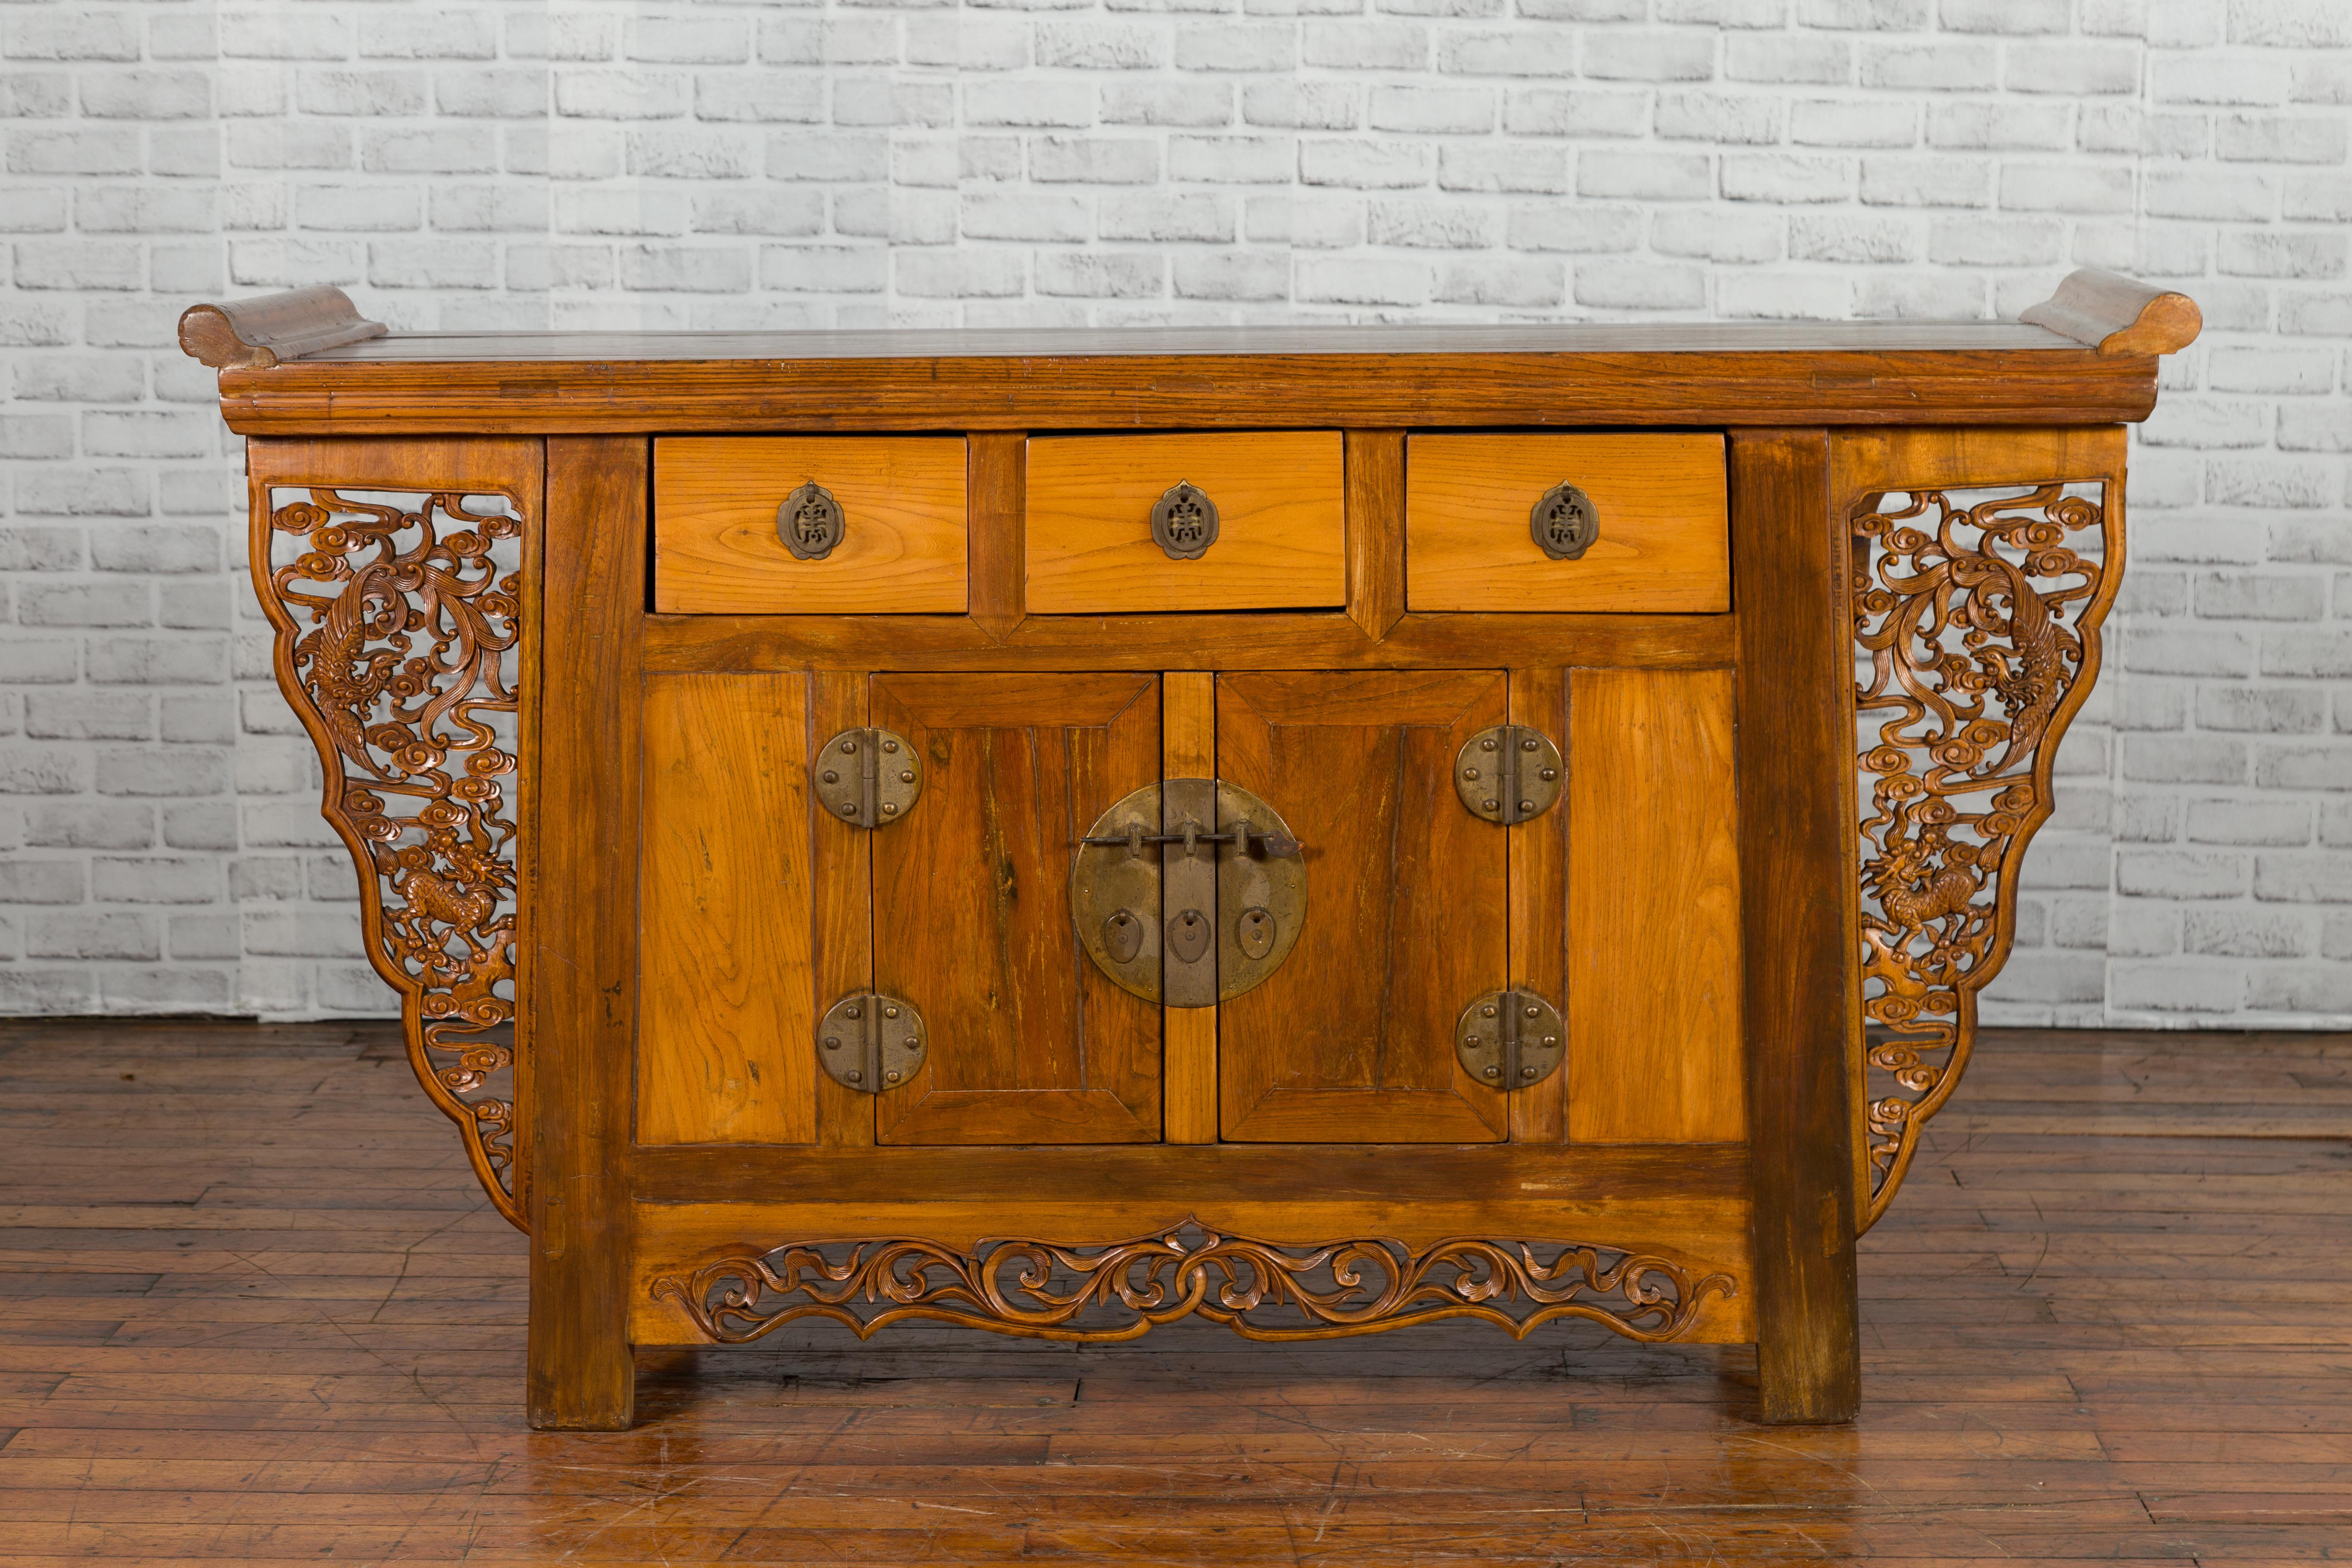 A Chinese Qing Dynasty period altar console cabinet from the 19th century with everted flanges, three drawers, petite double doors and carved spandrels with mythical animals. Created in China during the Qing Dynasty period, this altar cabinet